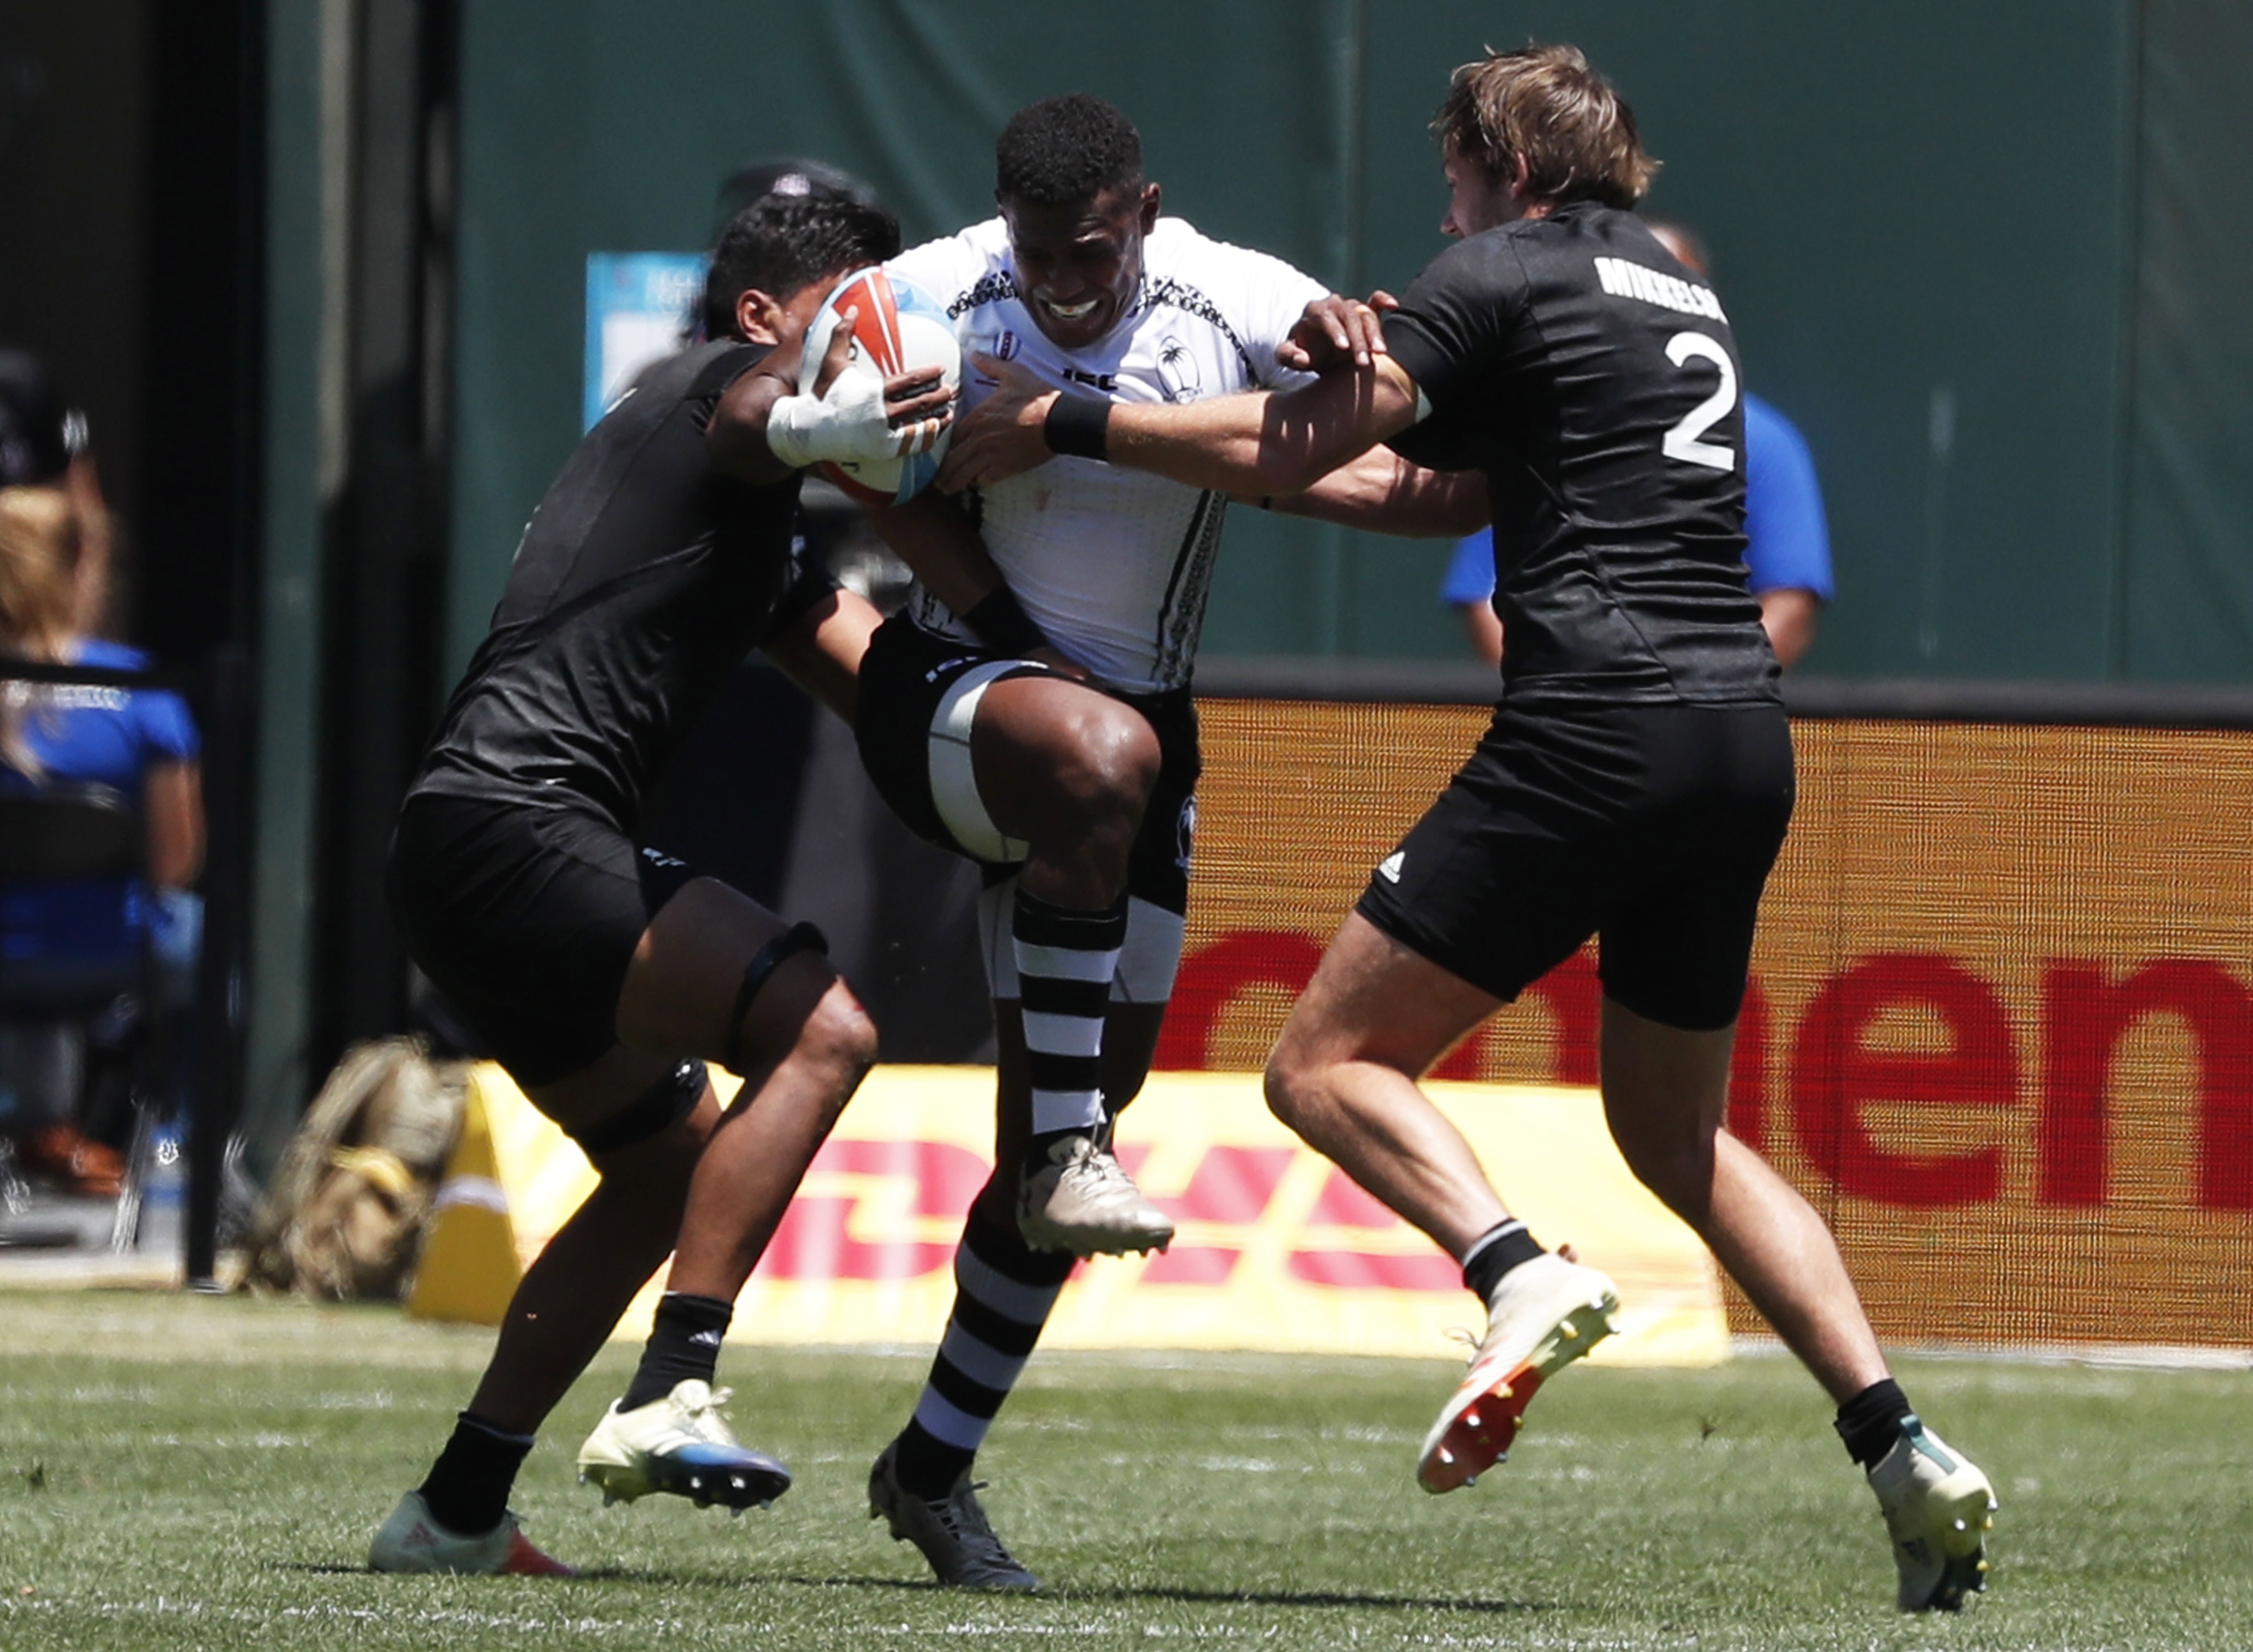 Fiji’s Kalione Nasoko is swamped by New Zealand’s Dylan Collier (left) and Tim Mikkelson. Photo: EPA